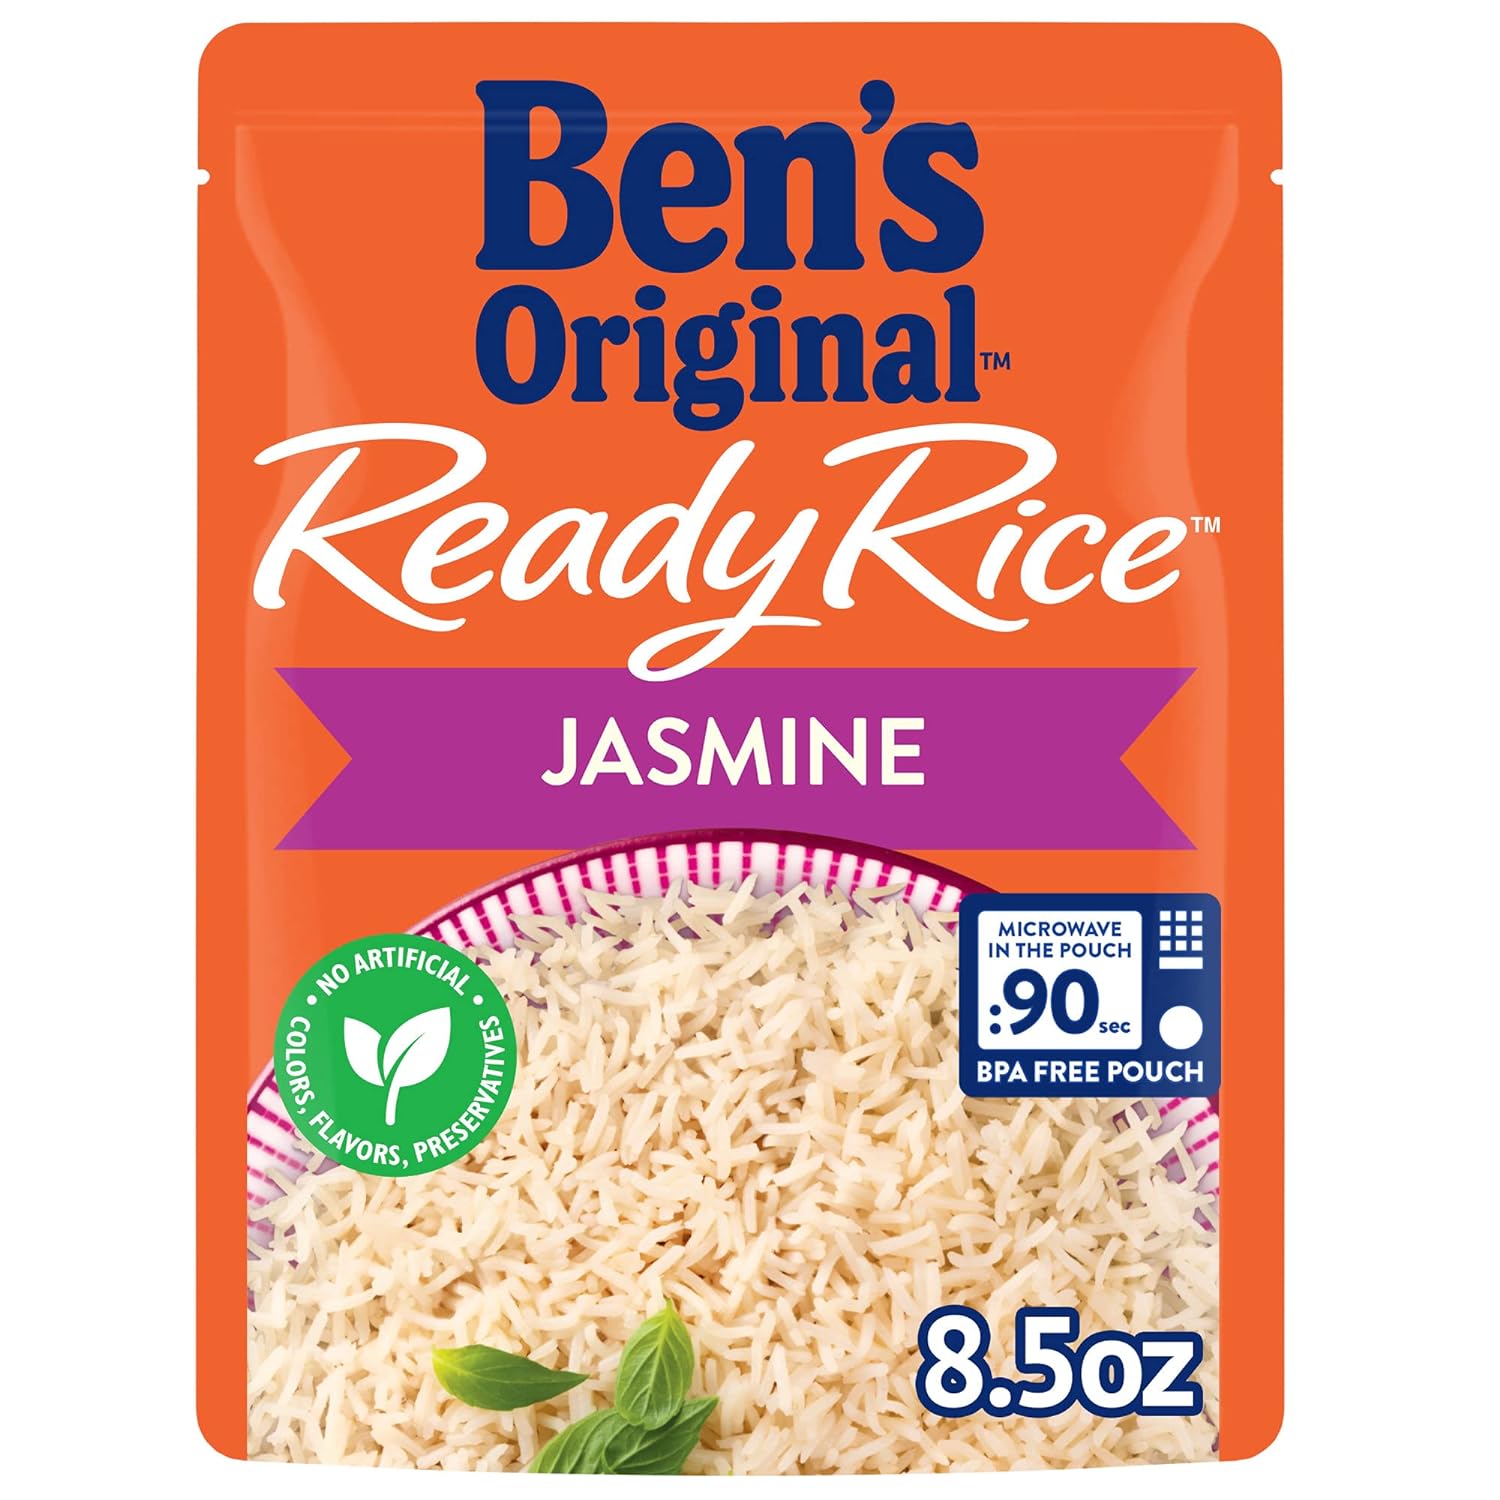 BEN'S ORIGINAL Ready Rice Jasmine Rice, Easy Dinner Side, 8.5 OZ Pouch (Pack of 6)